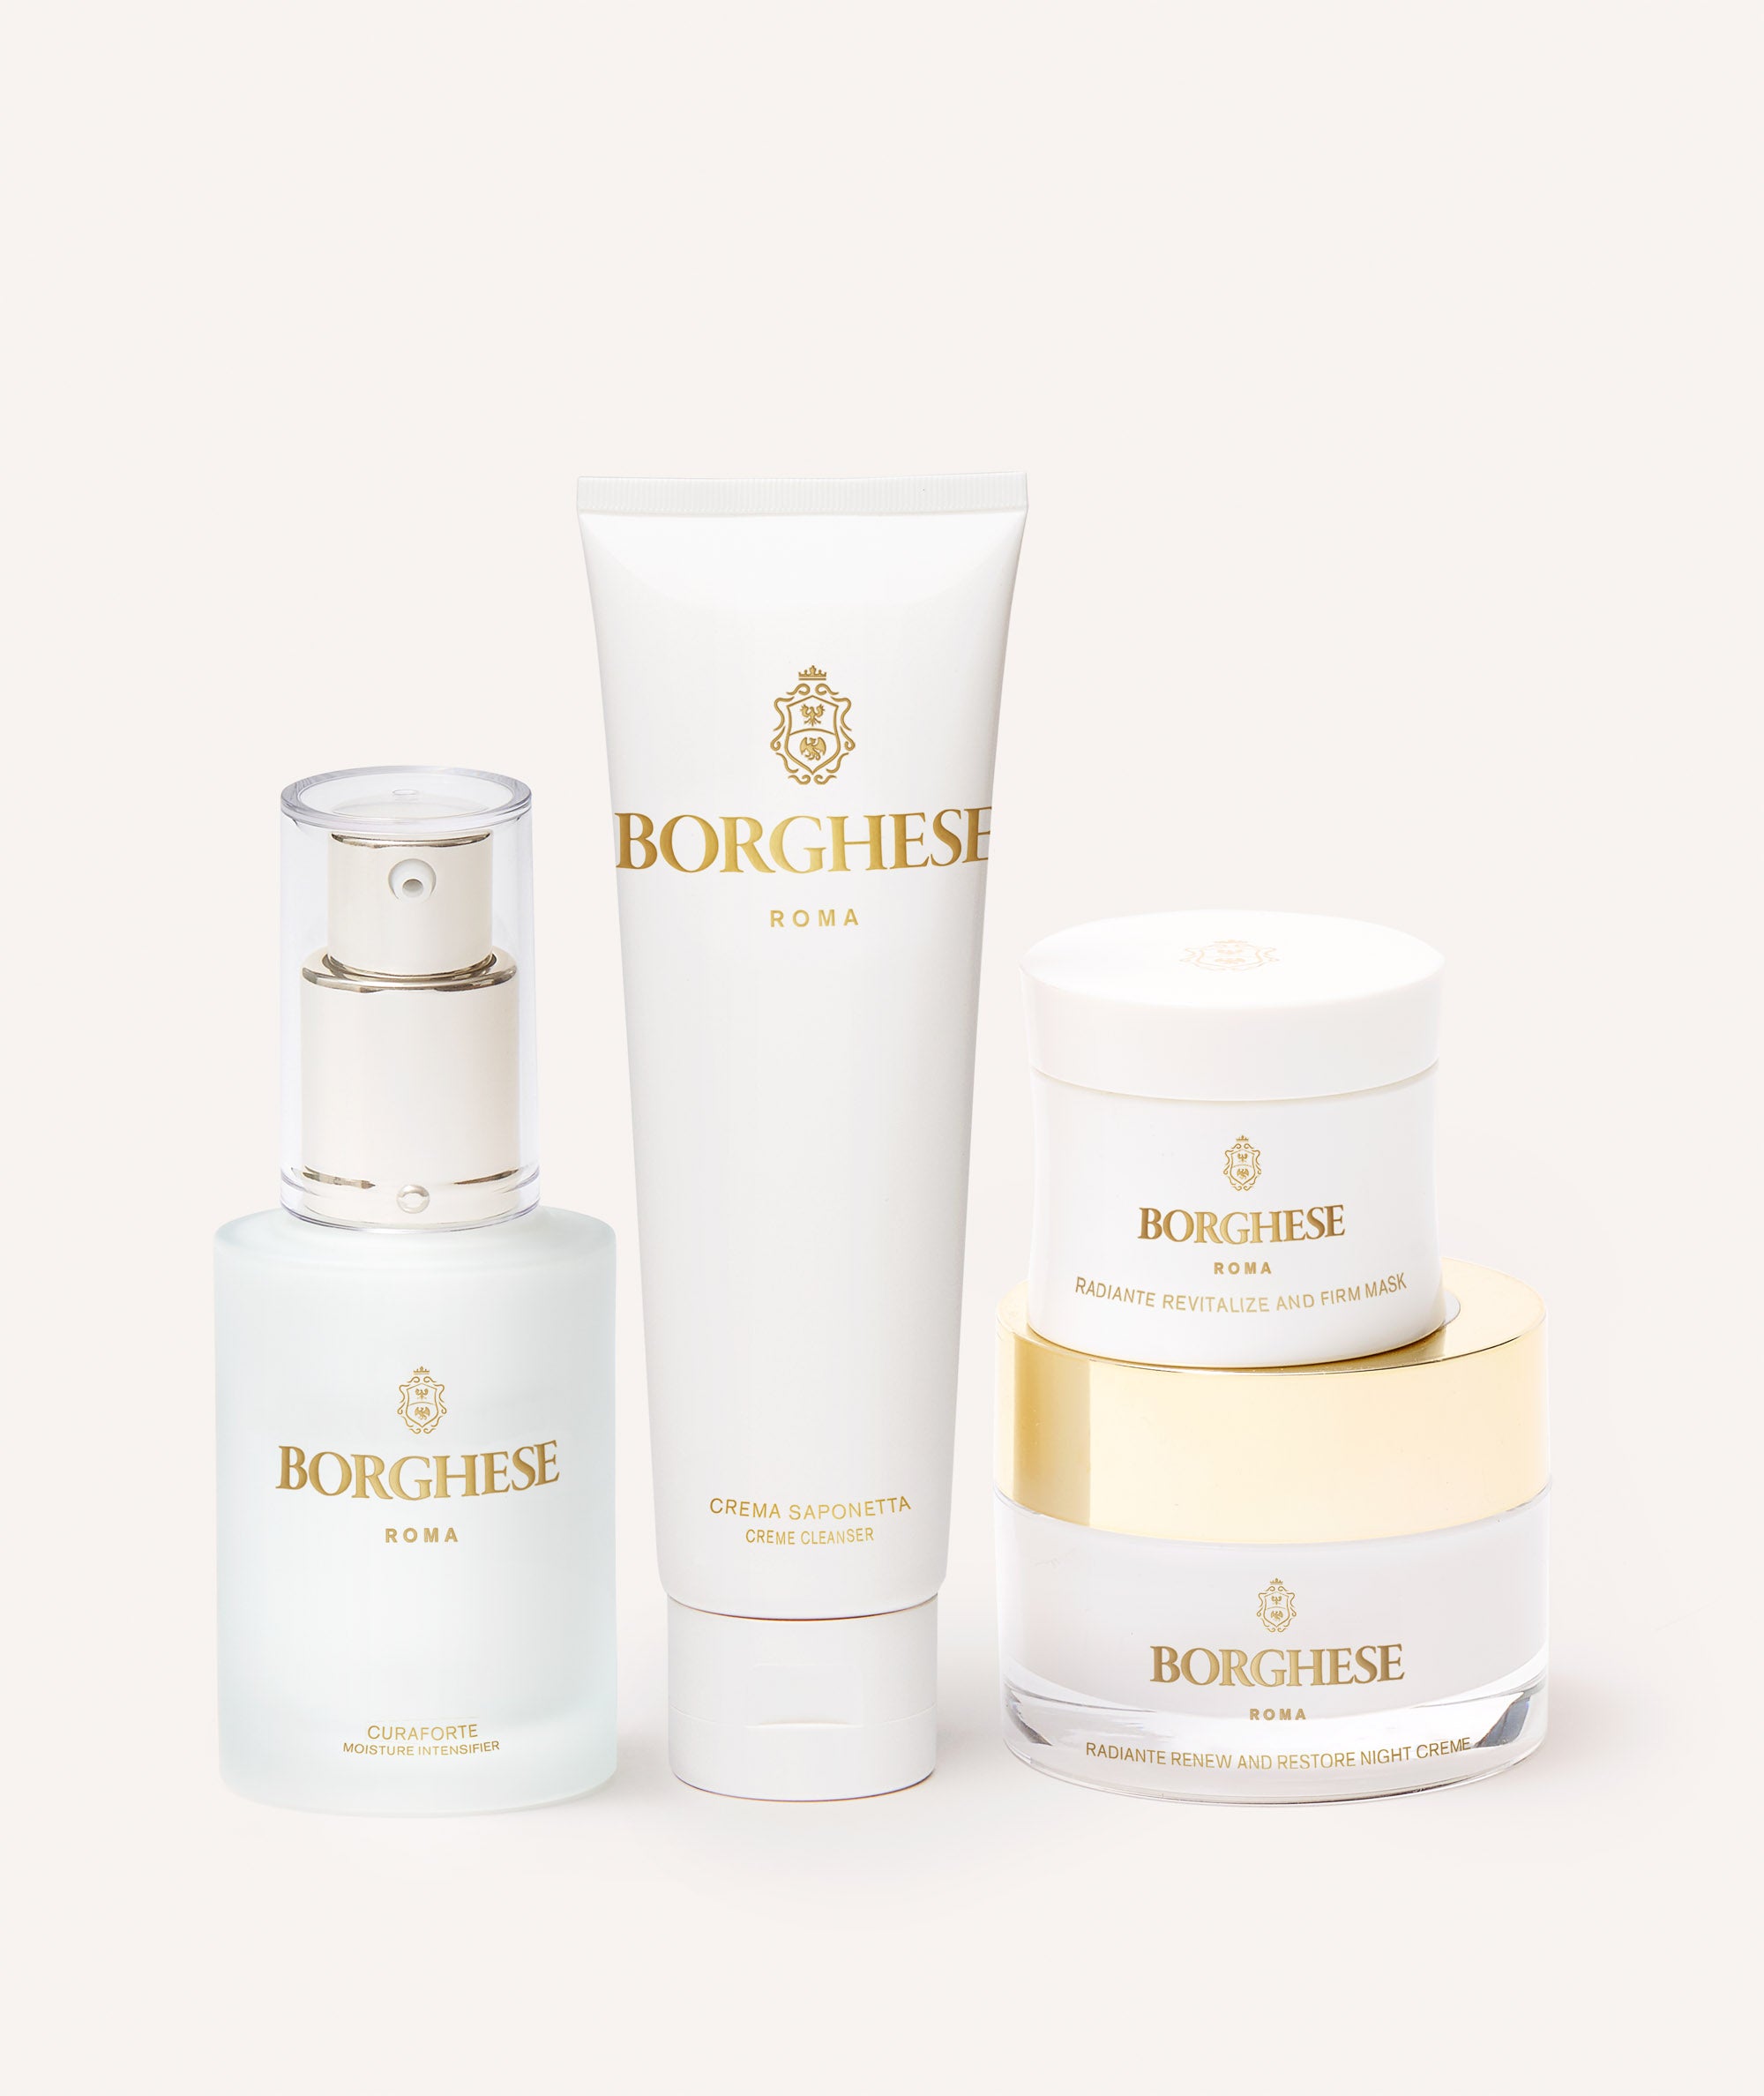 The Borghese 4-Piece Firm & Hydrate Gift Set contents